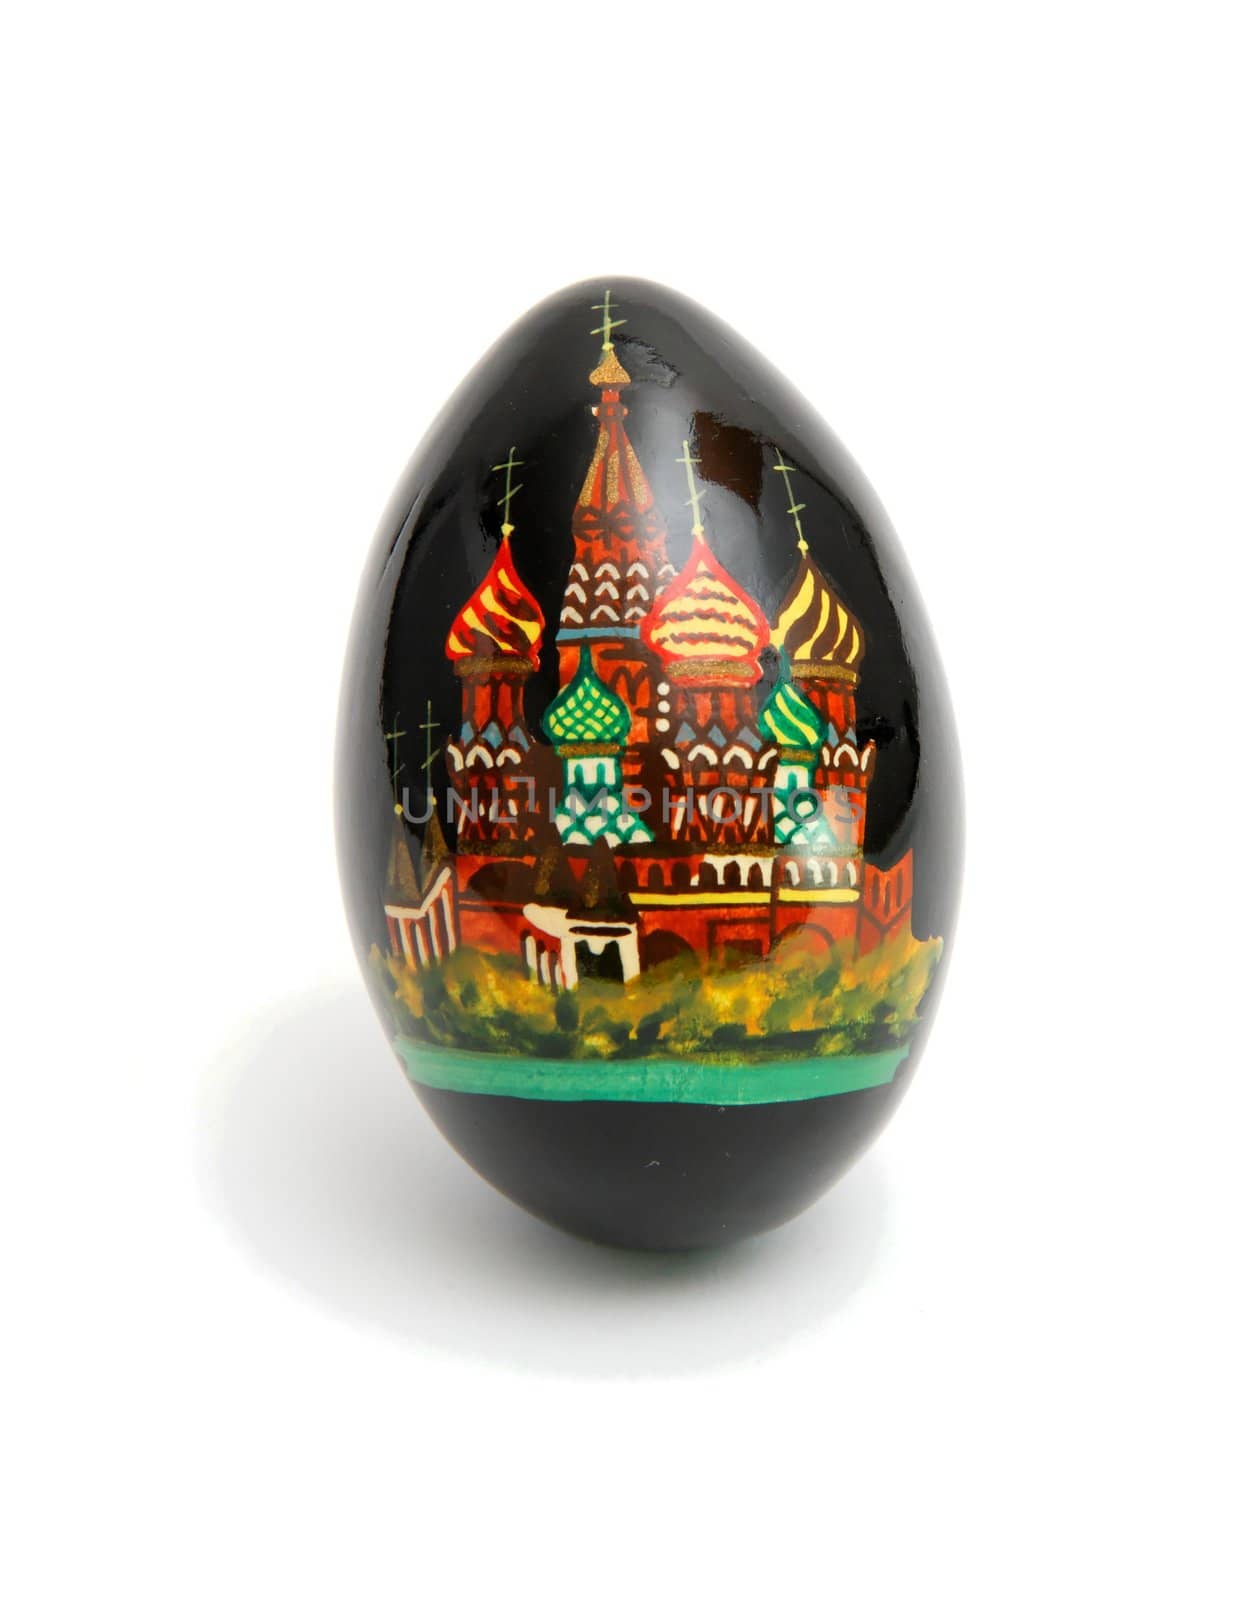 Russian Easter egg painted black with Saint Basil's cathedral on white background